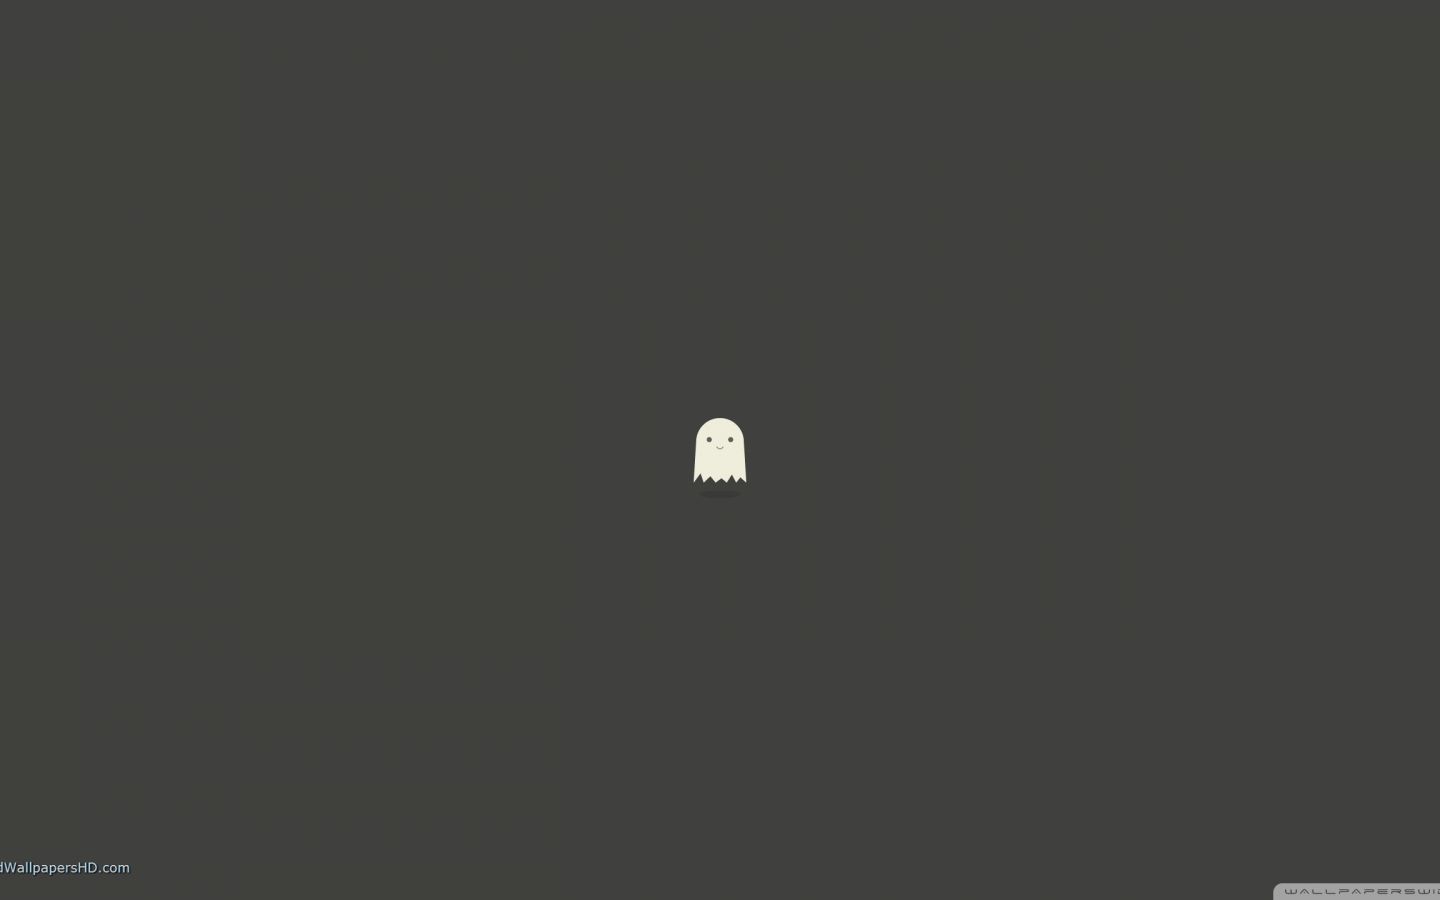 Funny Animated Ghost wallpaper in 1440x900 resolution